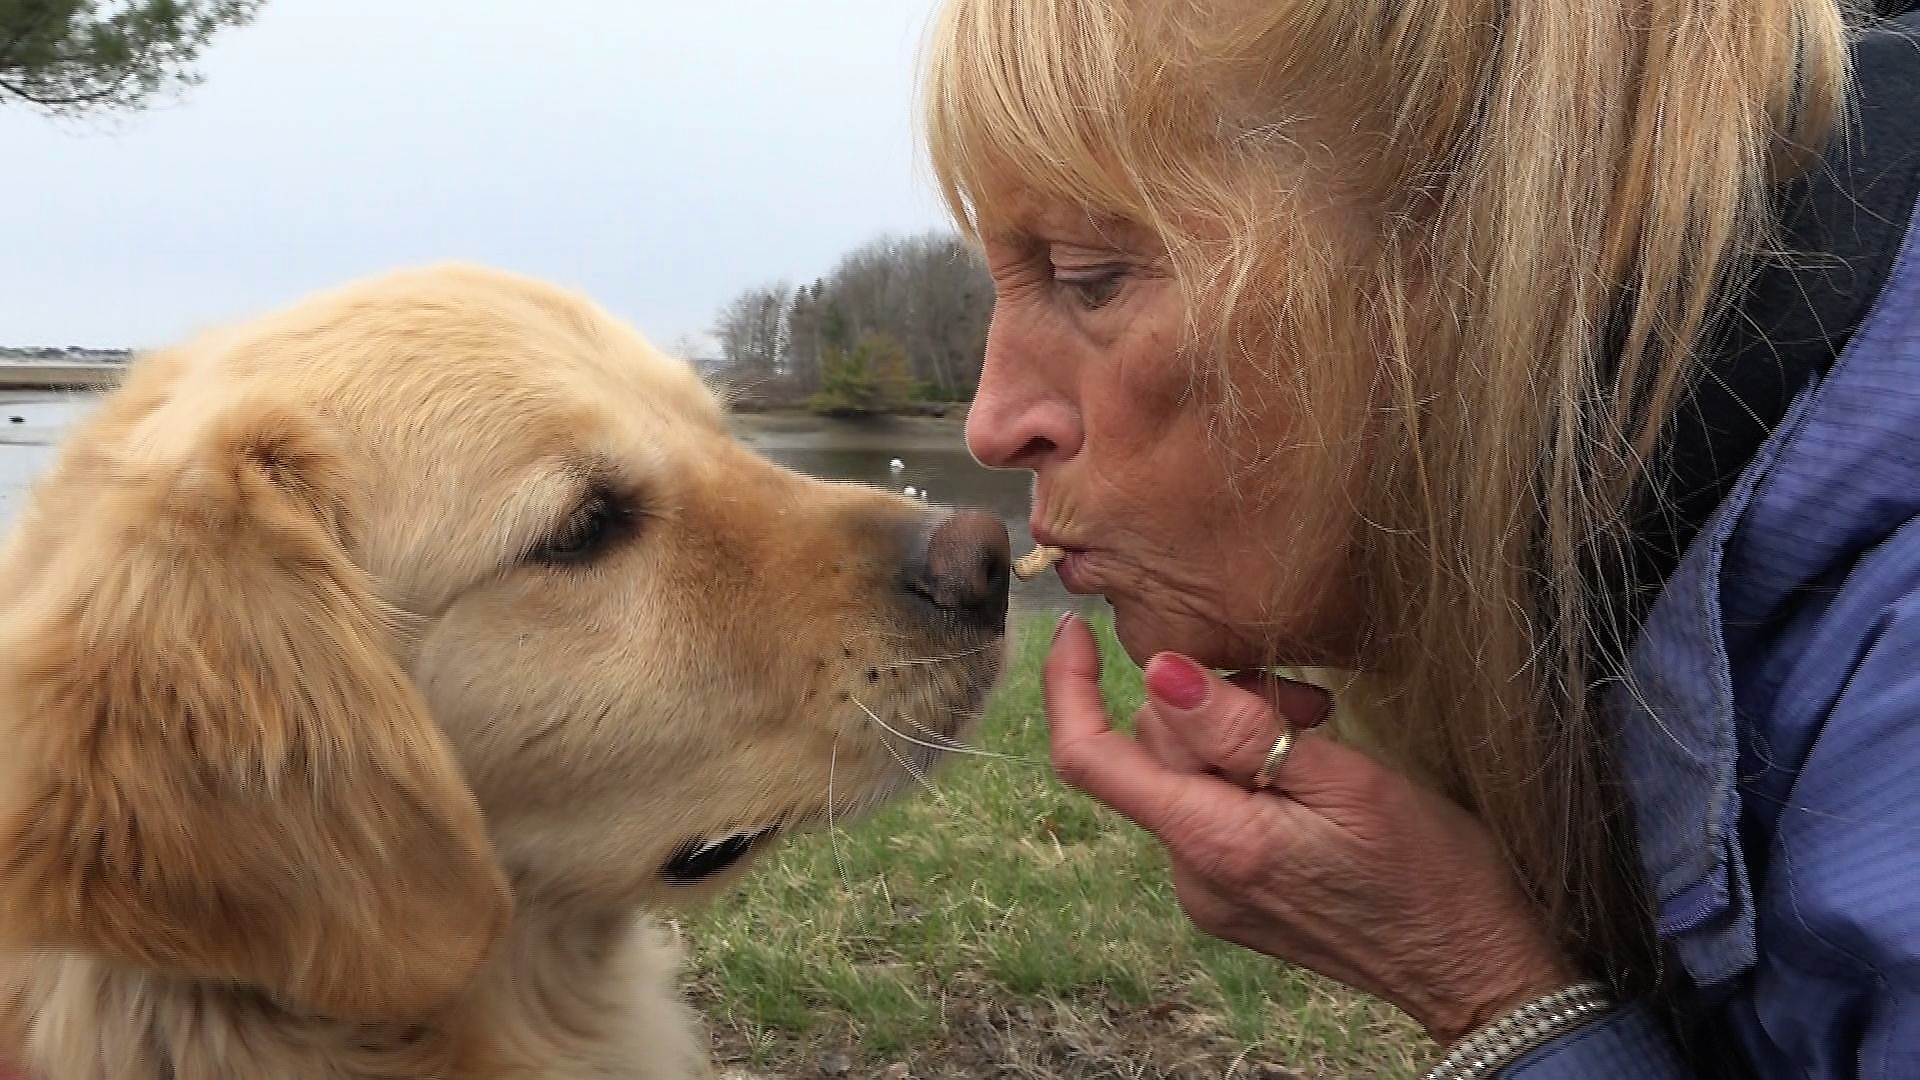 When Dianne Farr-Brady isn't hard at work helping those struggling with addiction, she finds peace and extra cash walking dogs through the Wag! app.